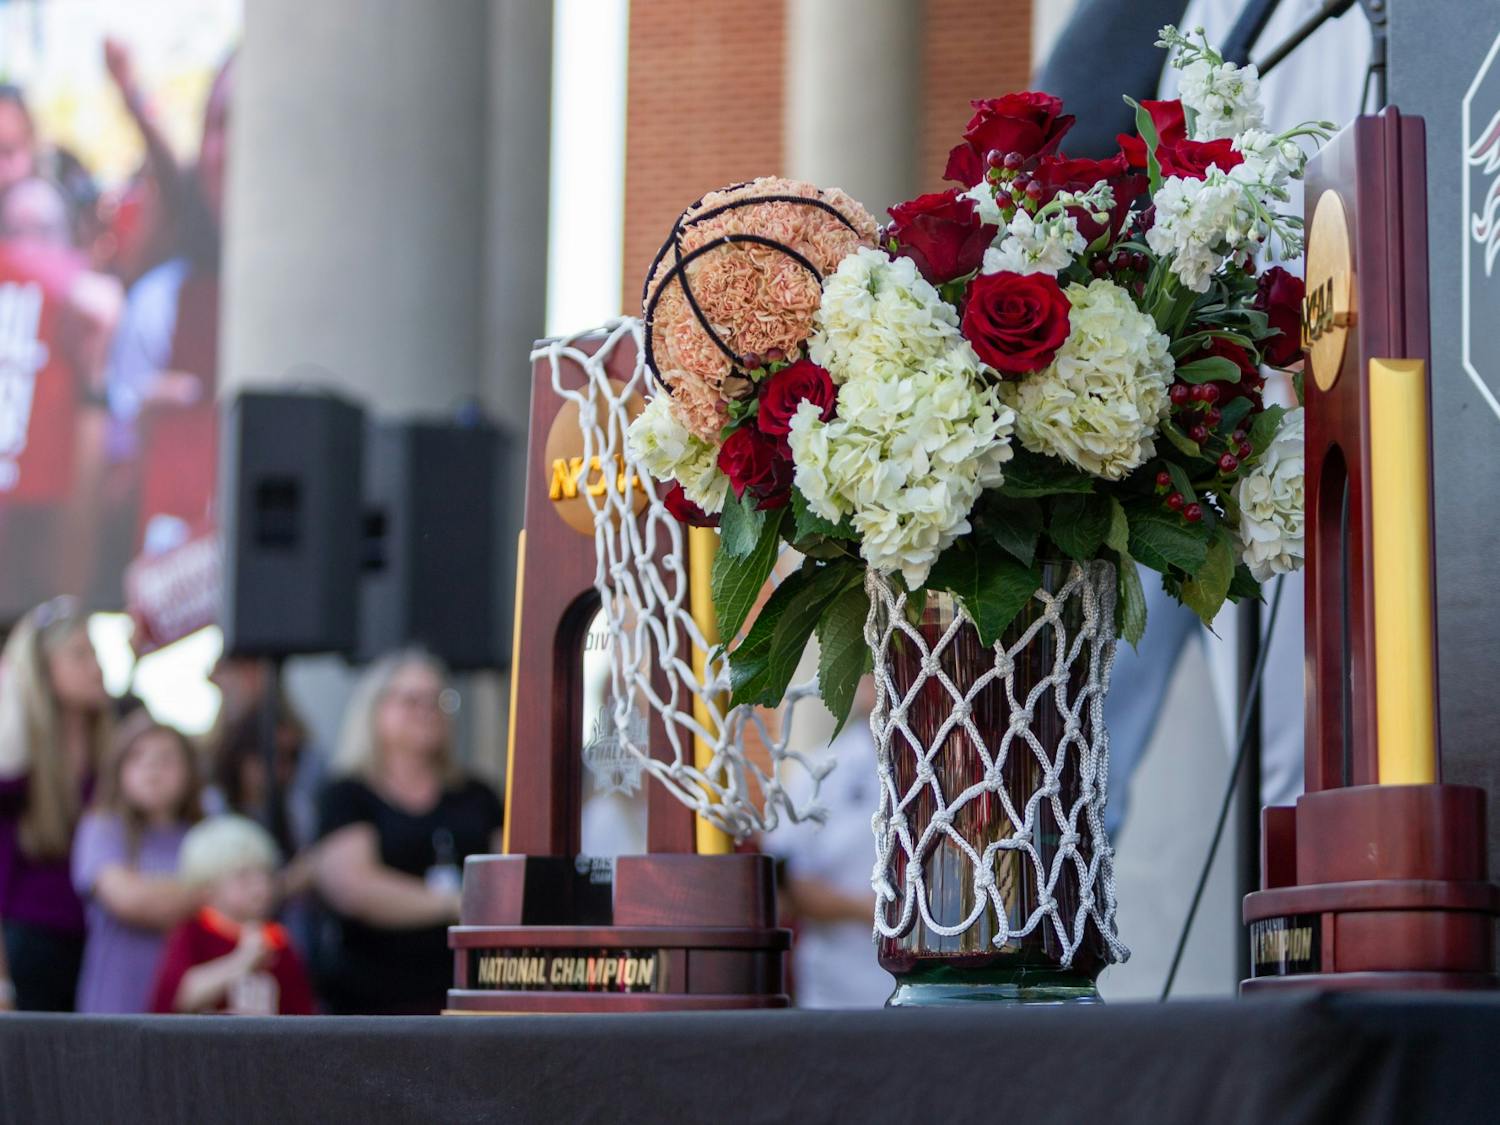 South Carolina's NCAA championship trophies sit on a table outside of Colonial Life Arena on April 4, 2022. The Gamecocks won their second national title on April 3, 2022 against the the University of Connecticut Huskies.